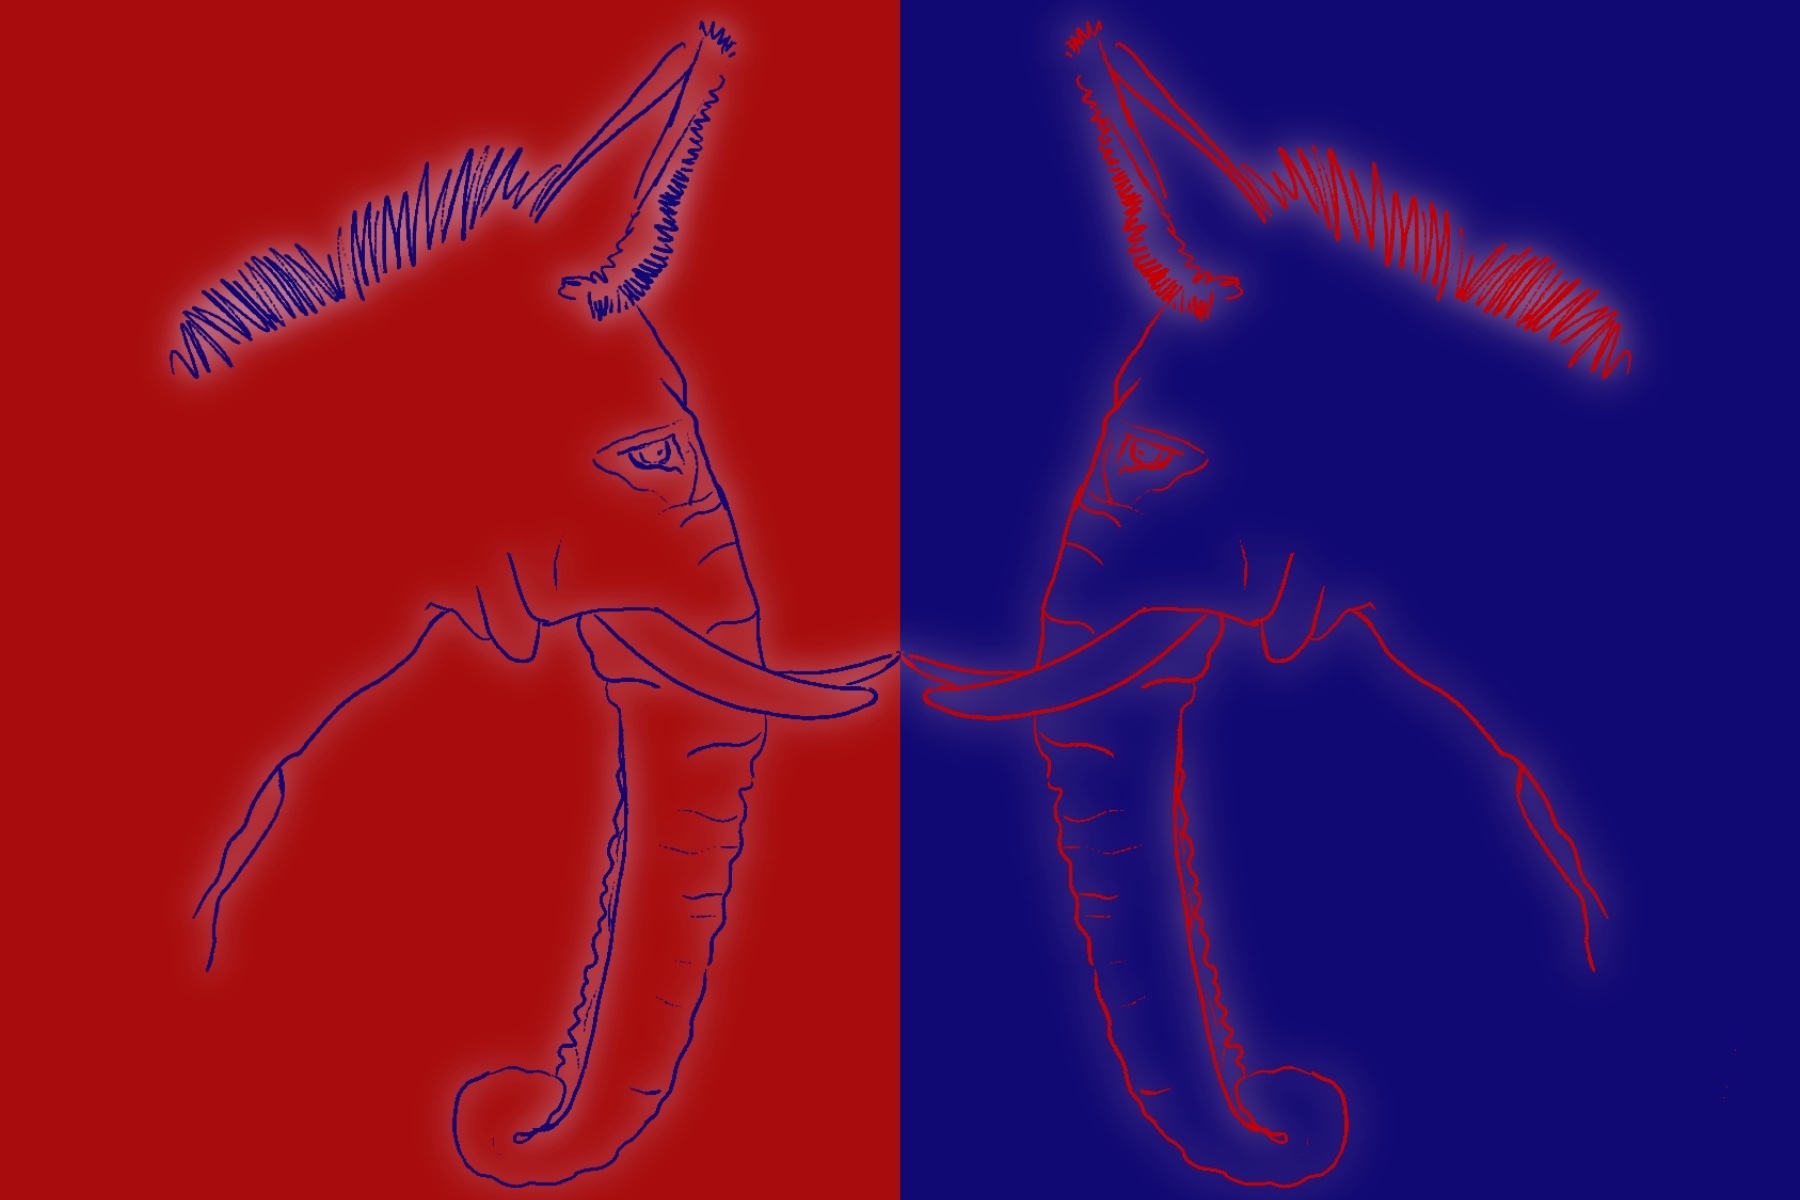 Illustration of the two political parties in America.